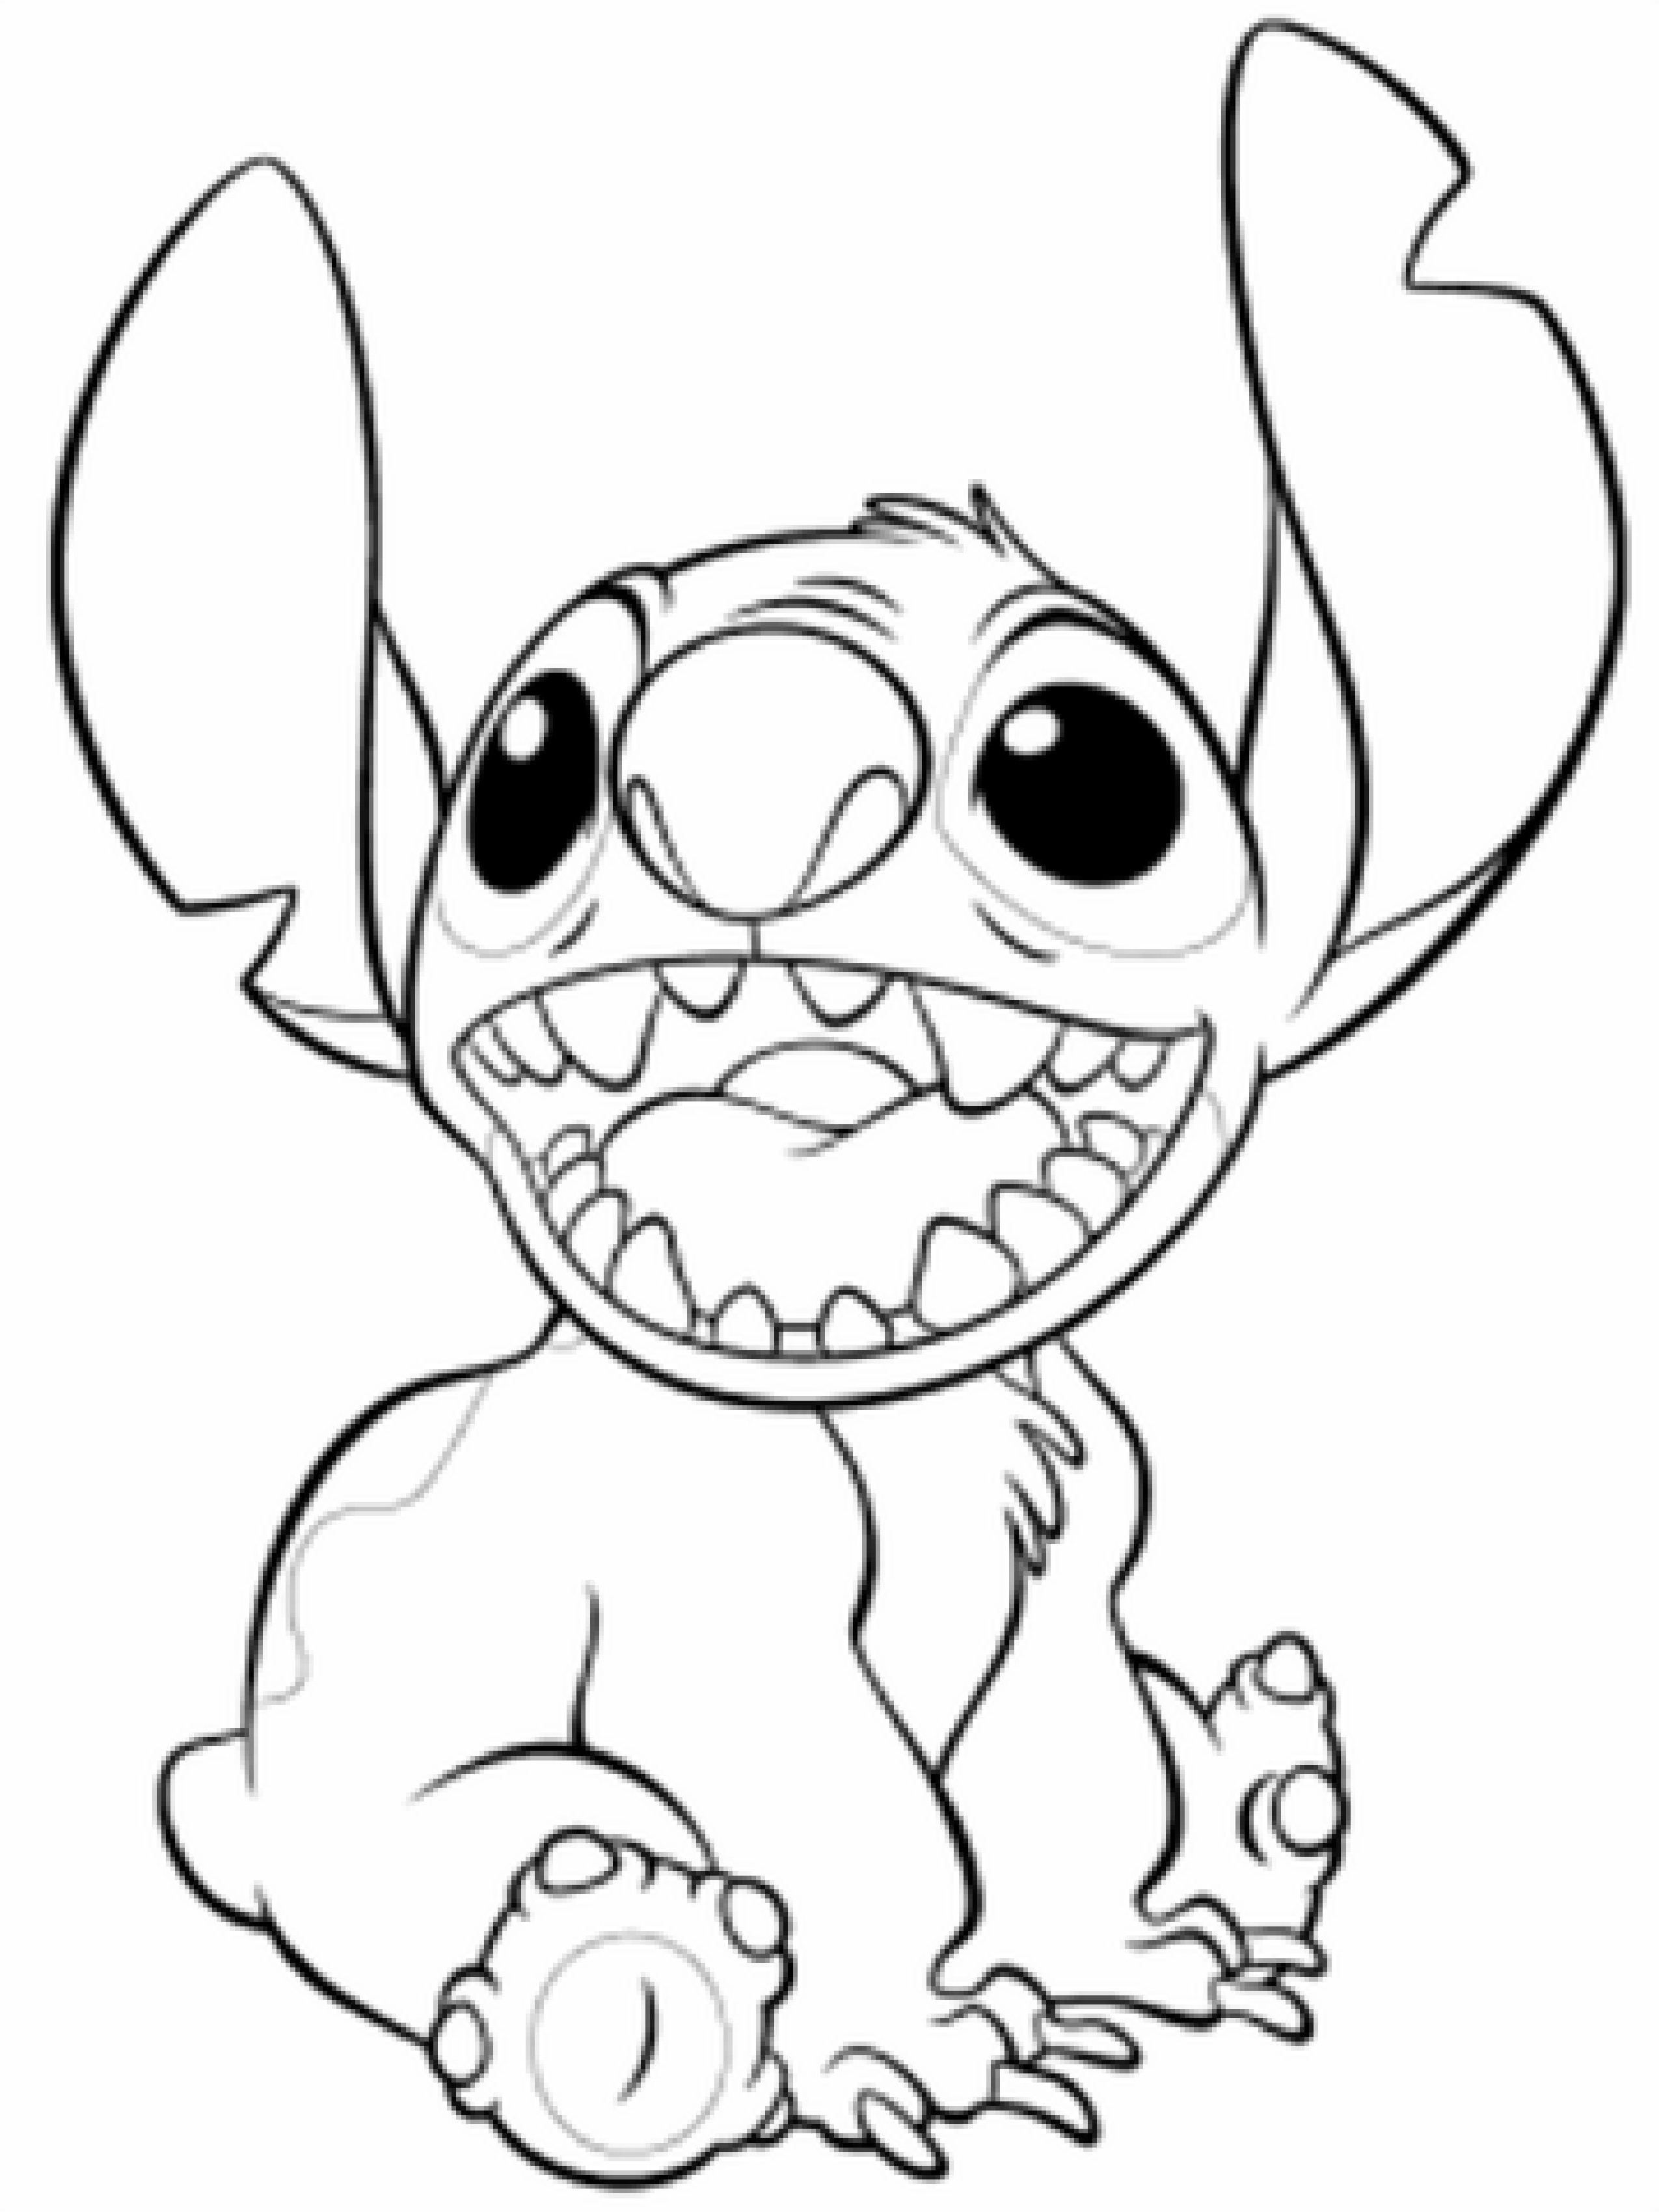 Ariel Baby Coloring Pages - Coloring Pages For All Ages